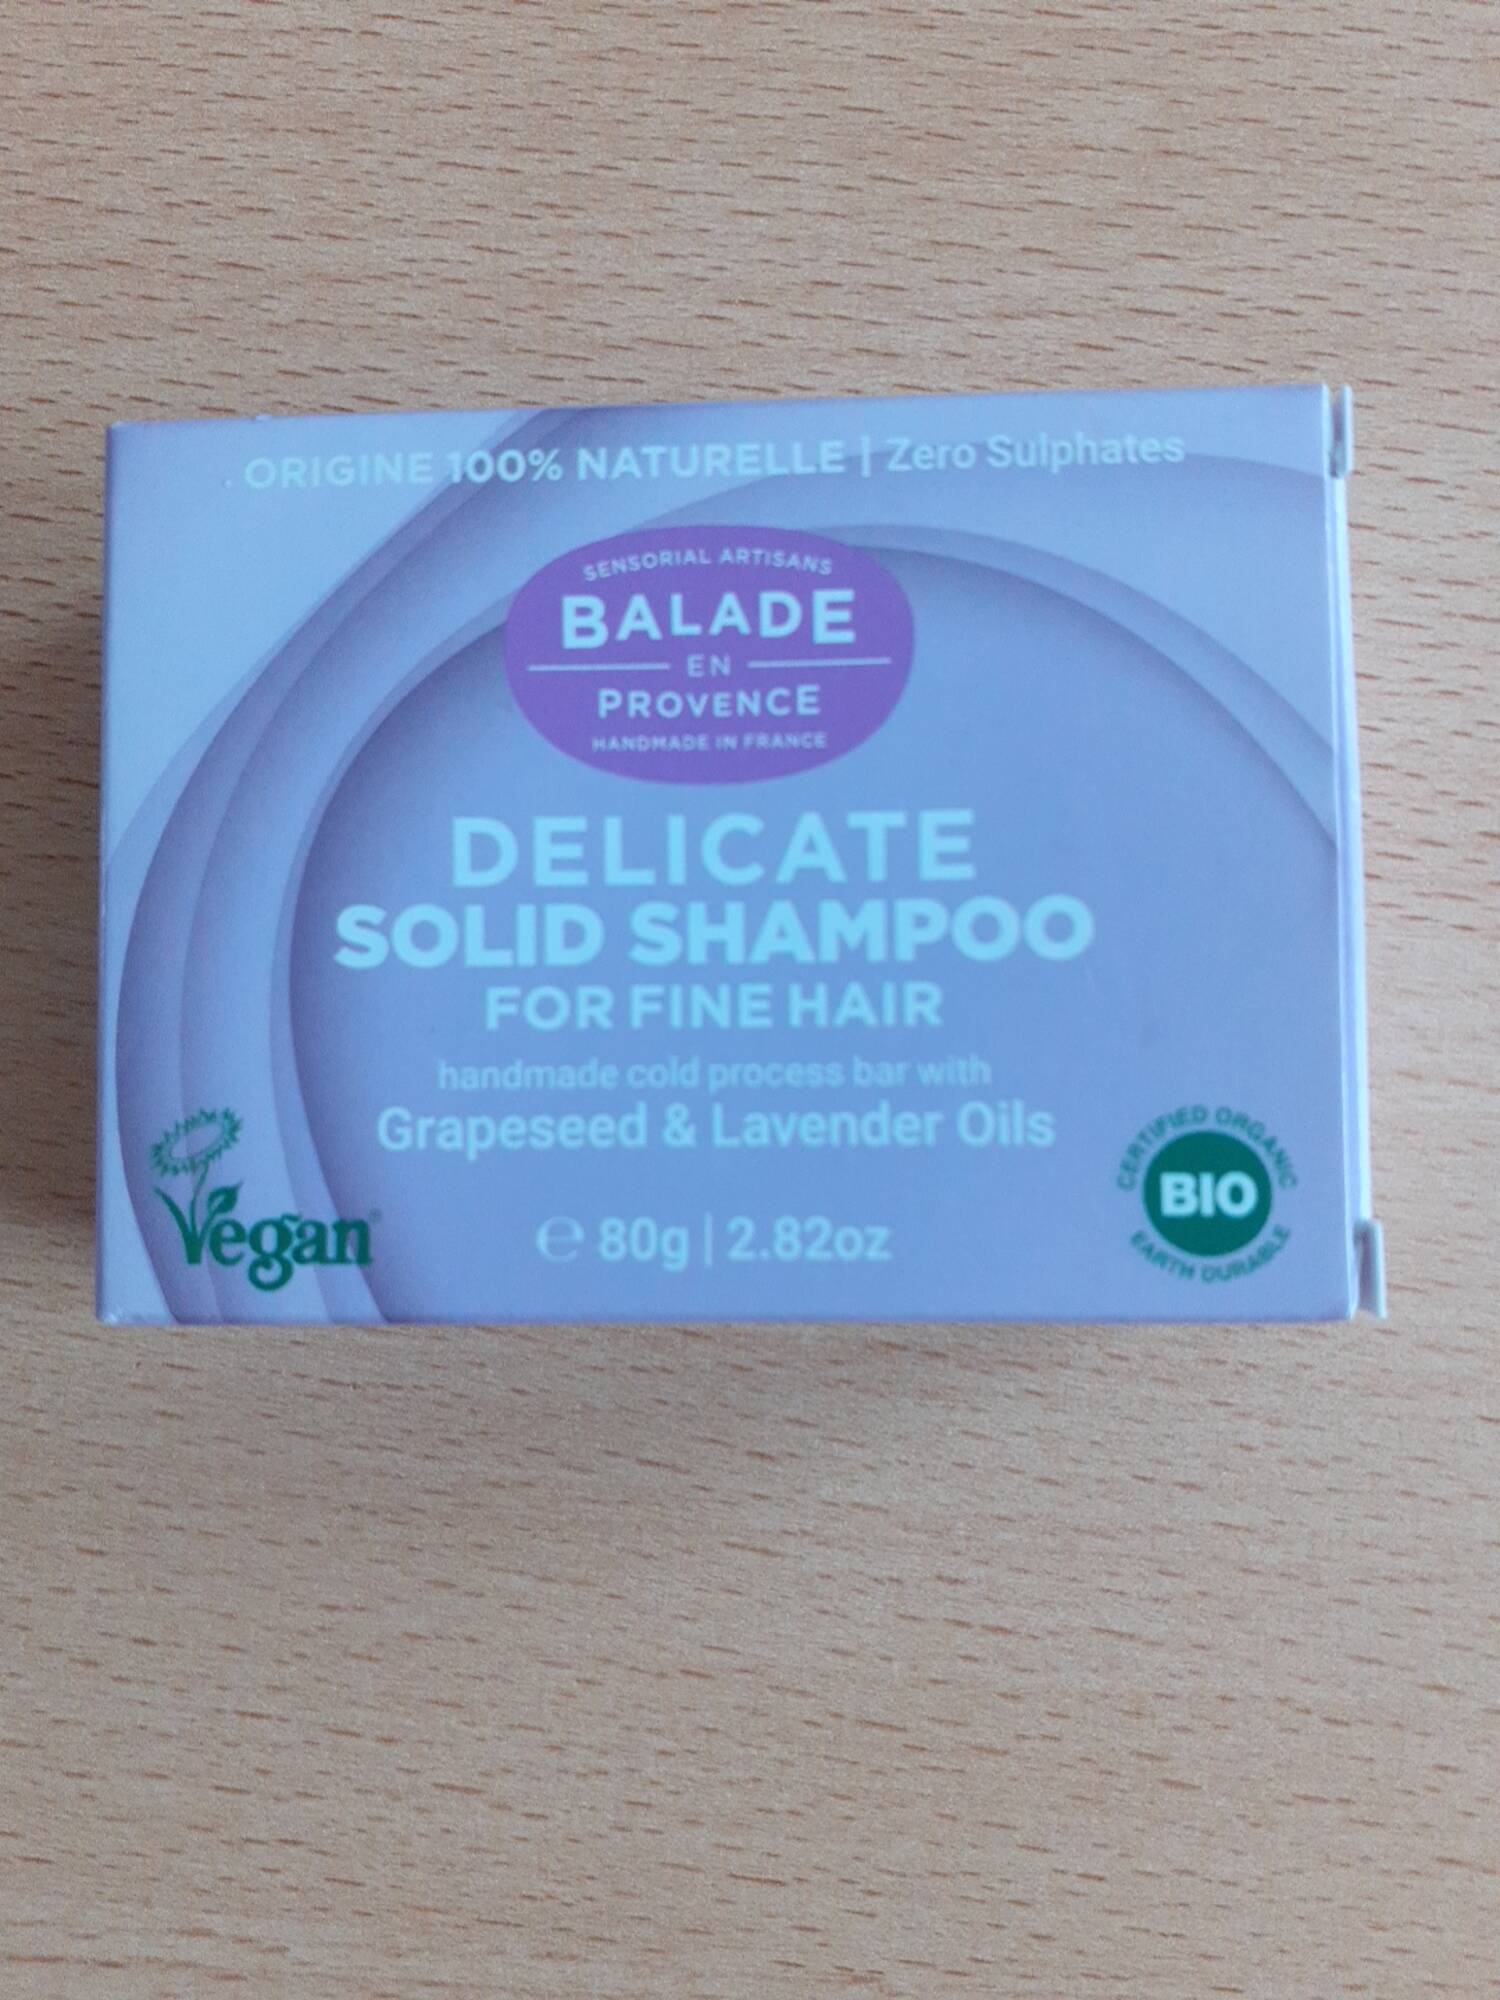 BALADE EN PROVENCE - Delicate solid shampoo for finer hair